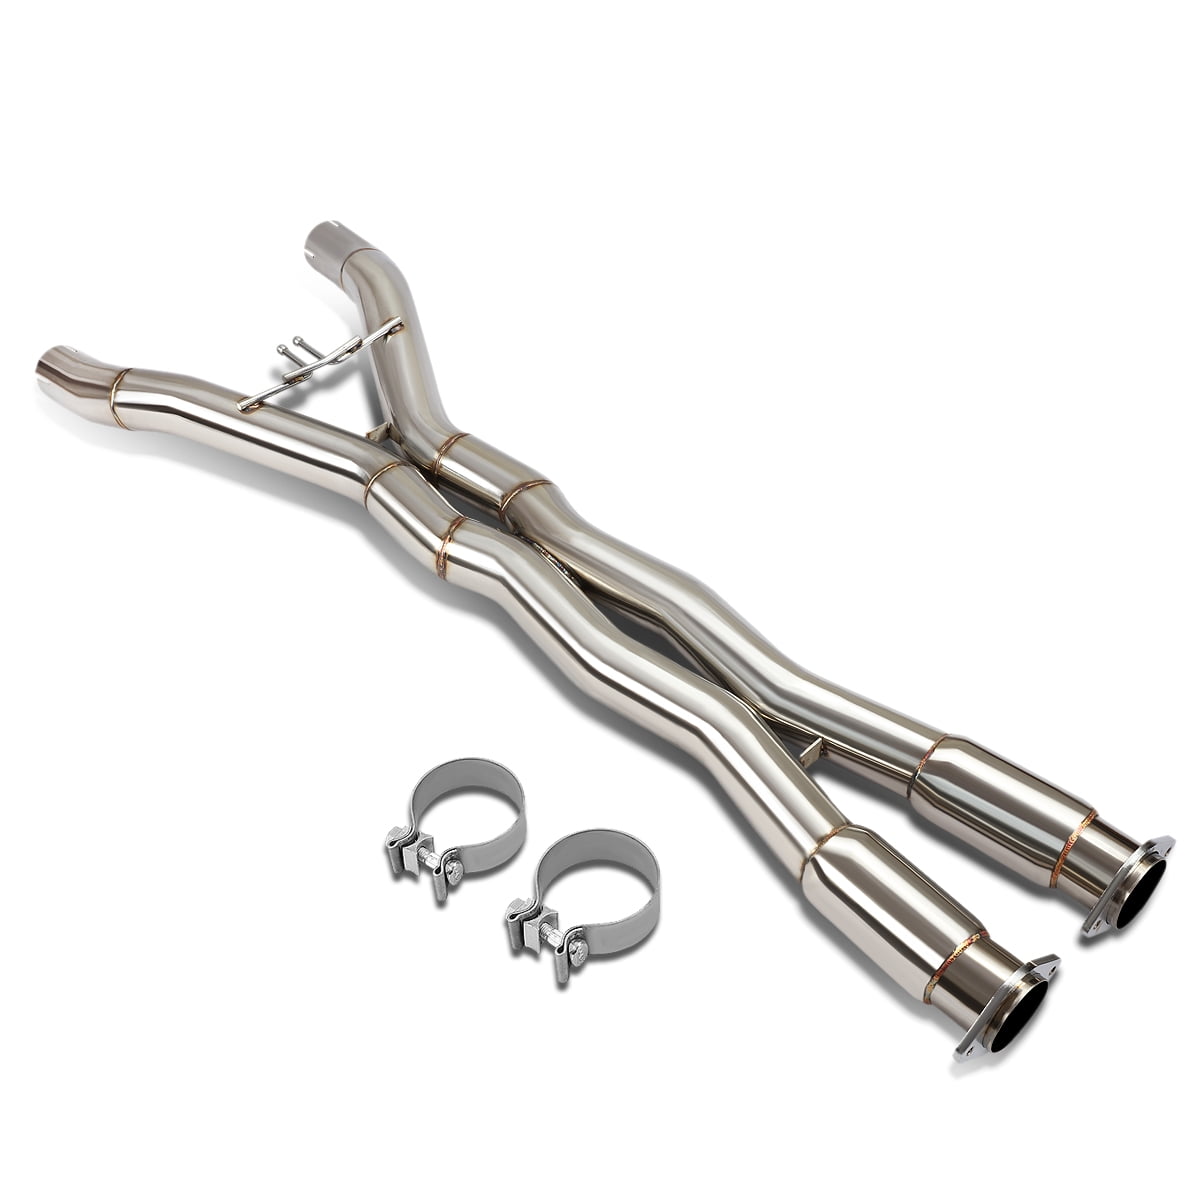 DNA Motoring HDS-CCV97C5+XP Stainless Steel Exhaust Header Manifold with X-Pipe 